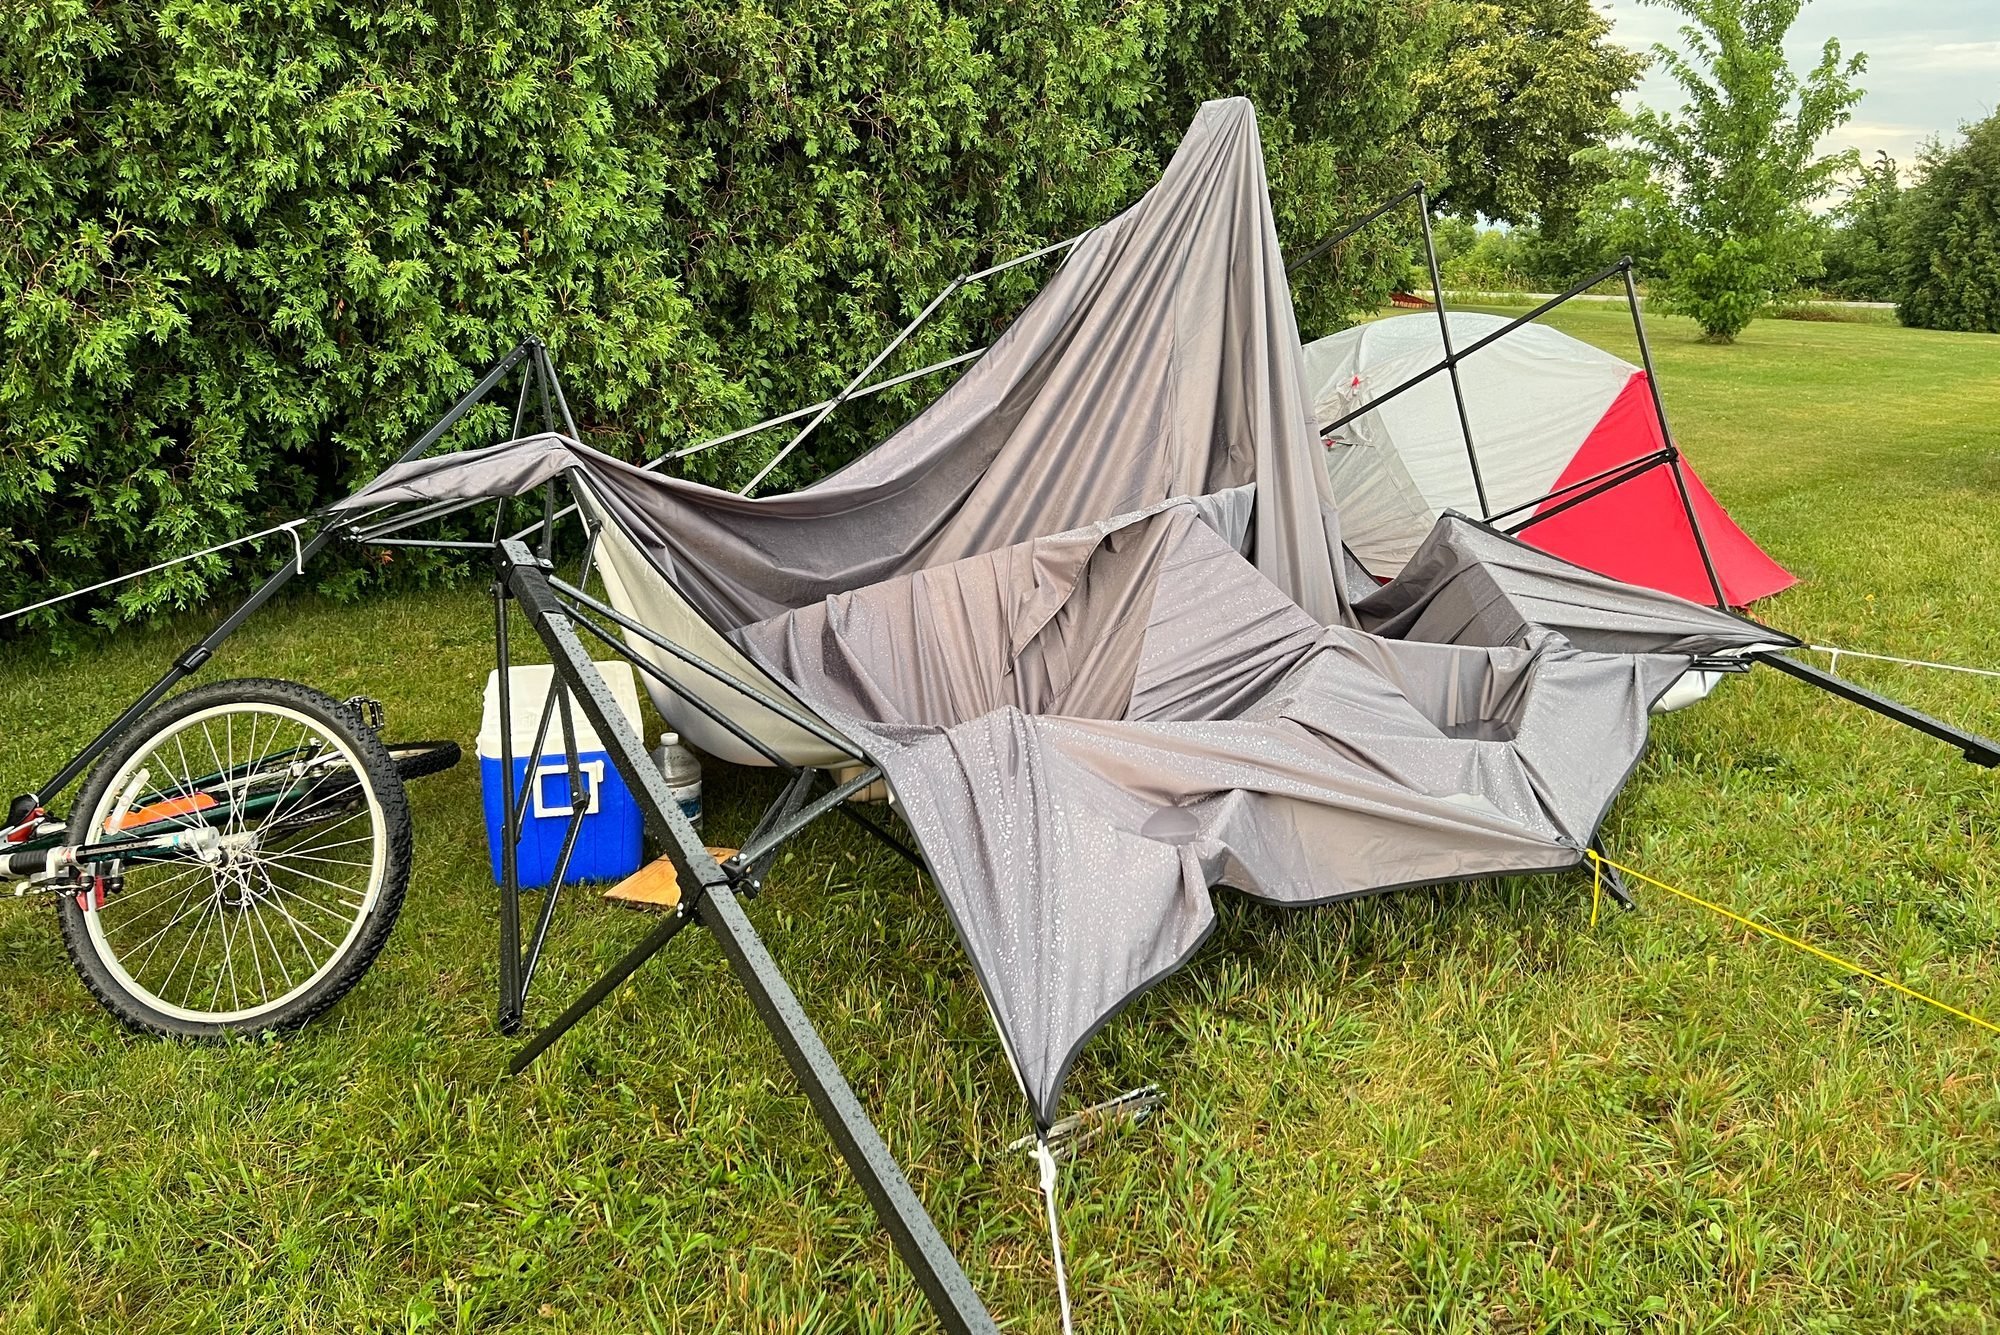 Repair your tent out in the field